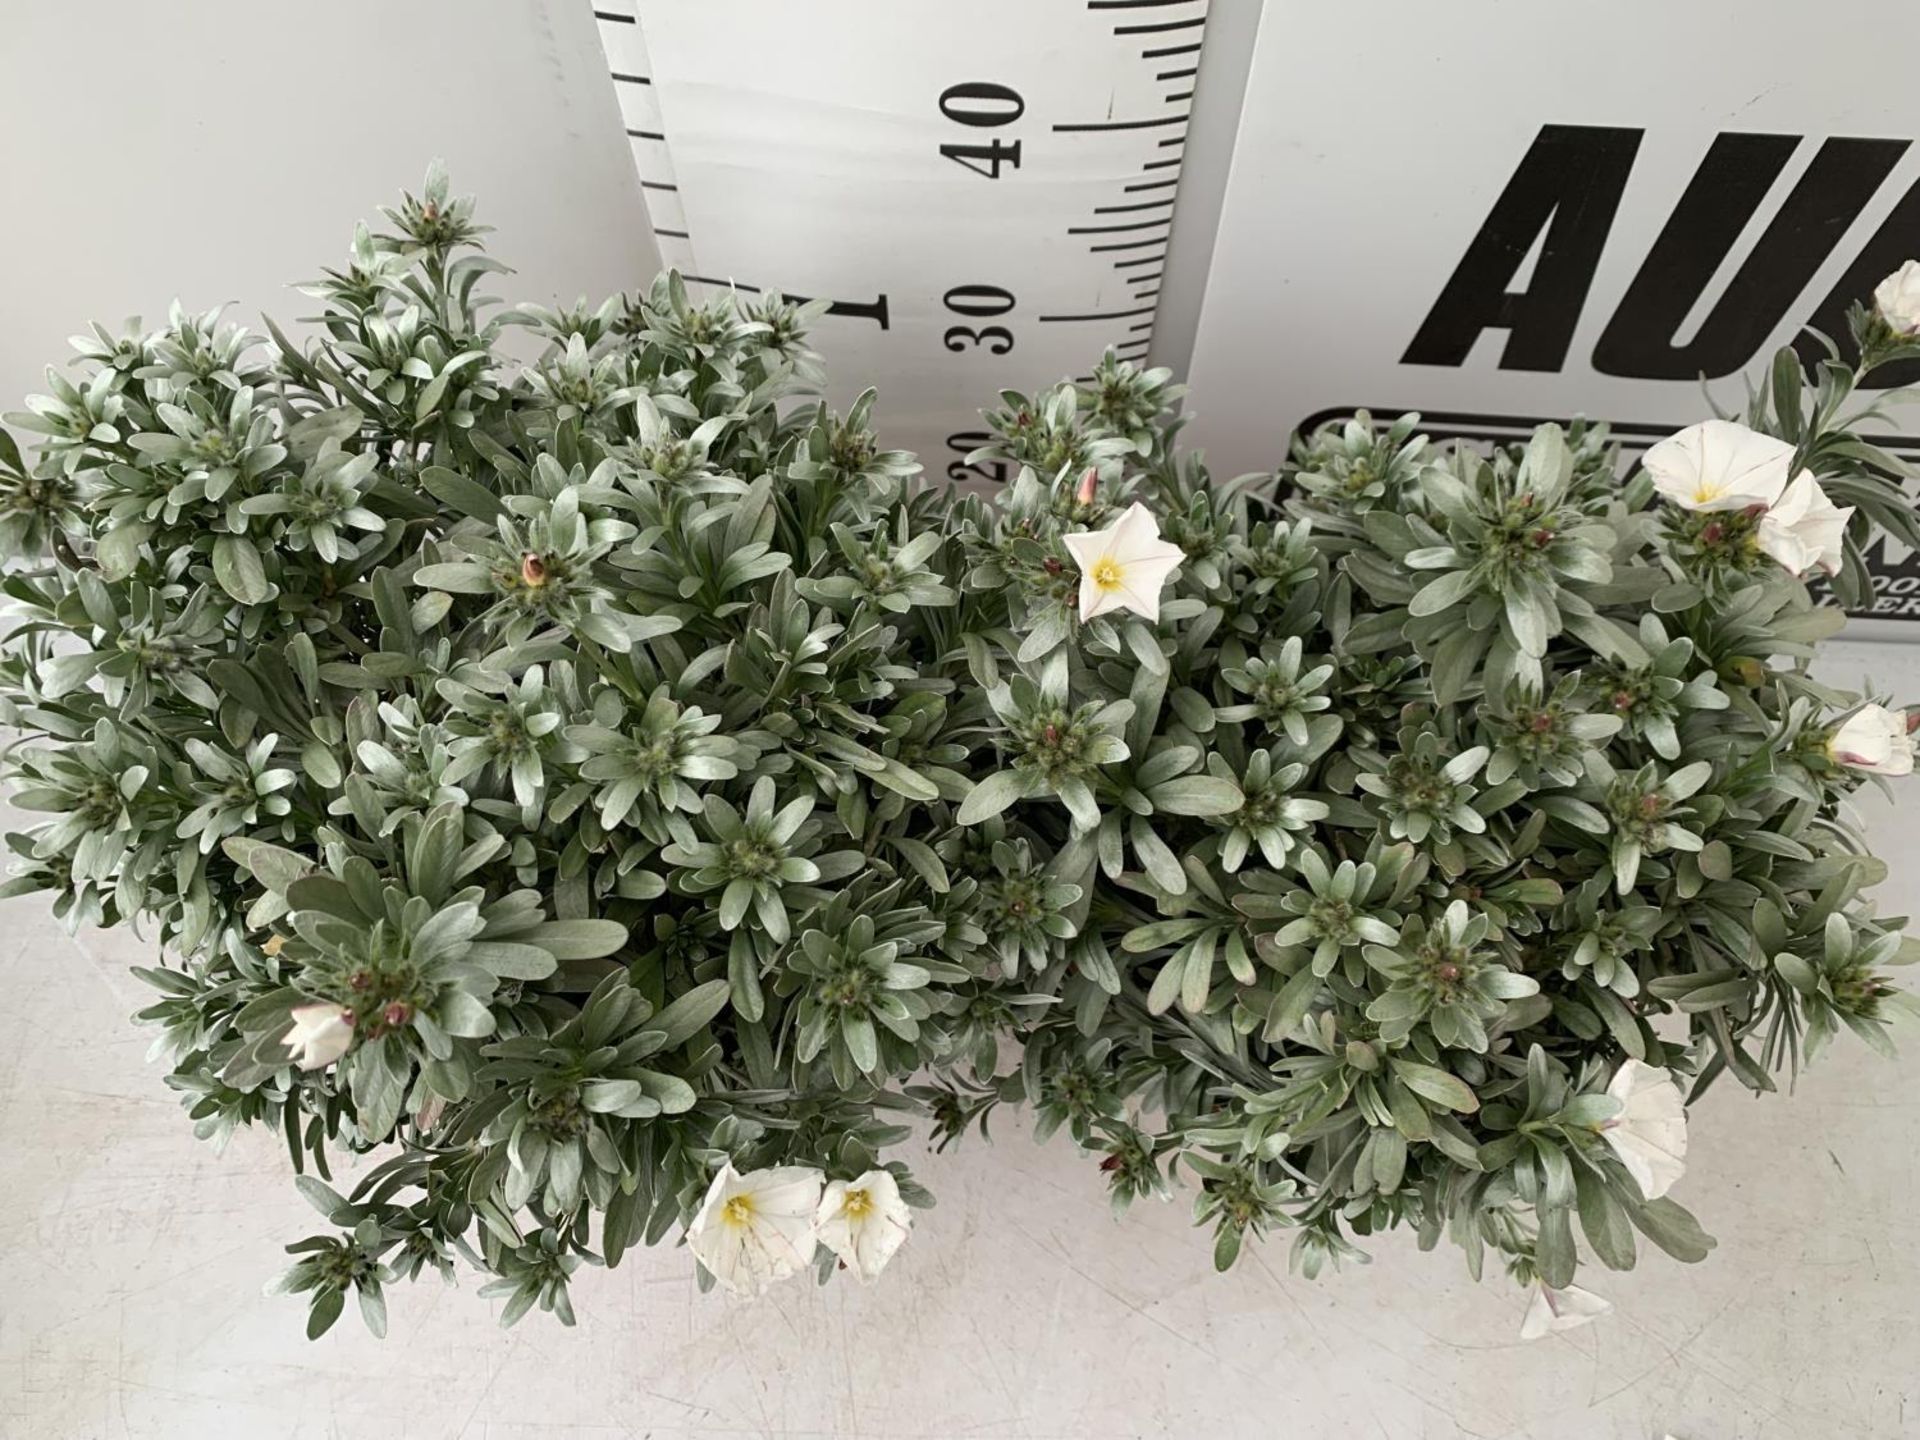 TWO CONVOLVULUS CNEORUM WITH WHITE FLOWERS IN 5 LTR POTS APPROX 45CM IN HEIGHT PLUS VAT TO BE SOLD - Image 3 of 8